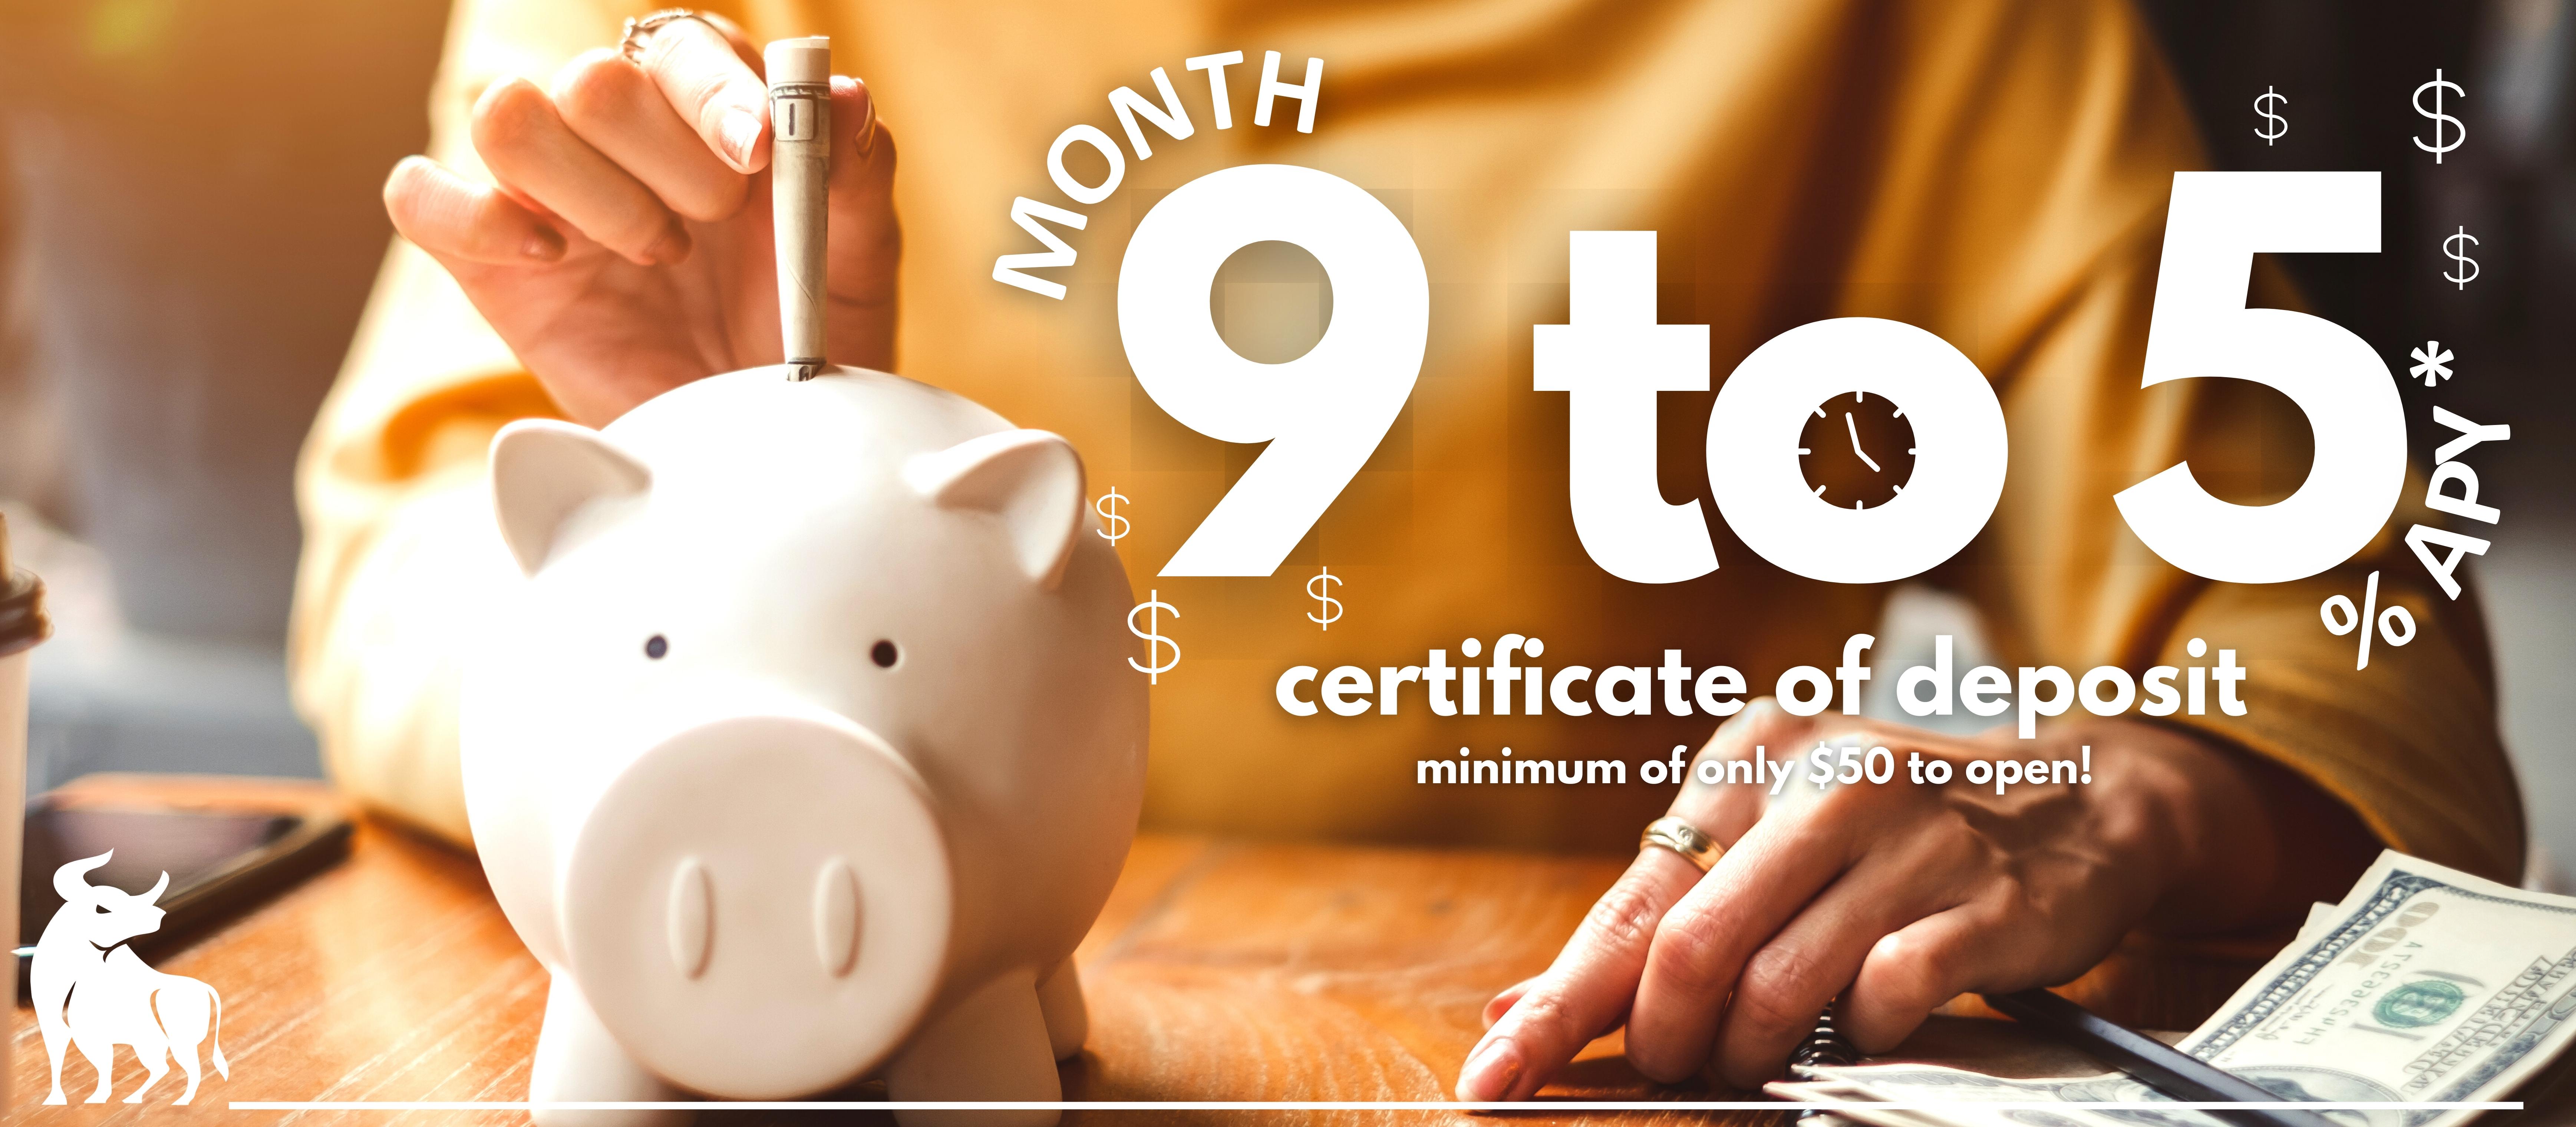 Build Your Own CD Special, Save money YOUR way. Pick your term and earn 4.25% APY*.